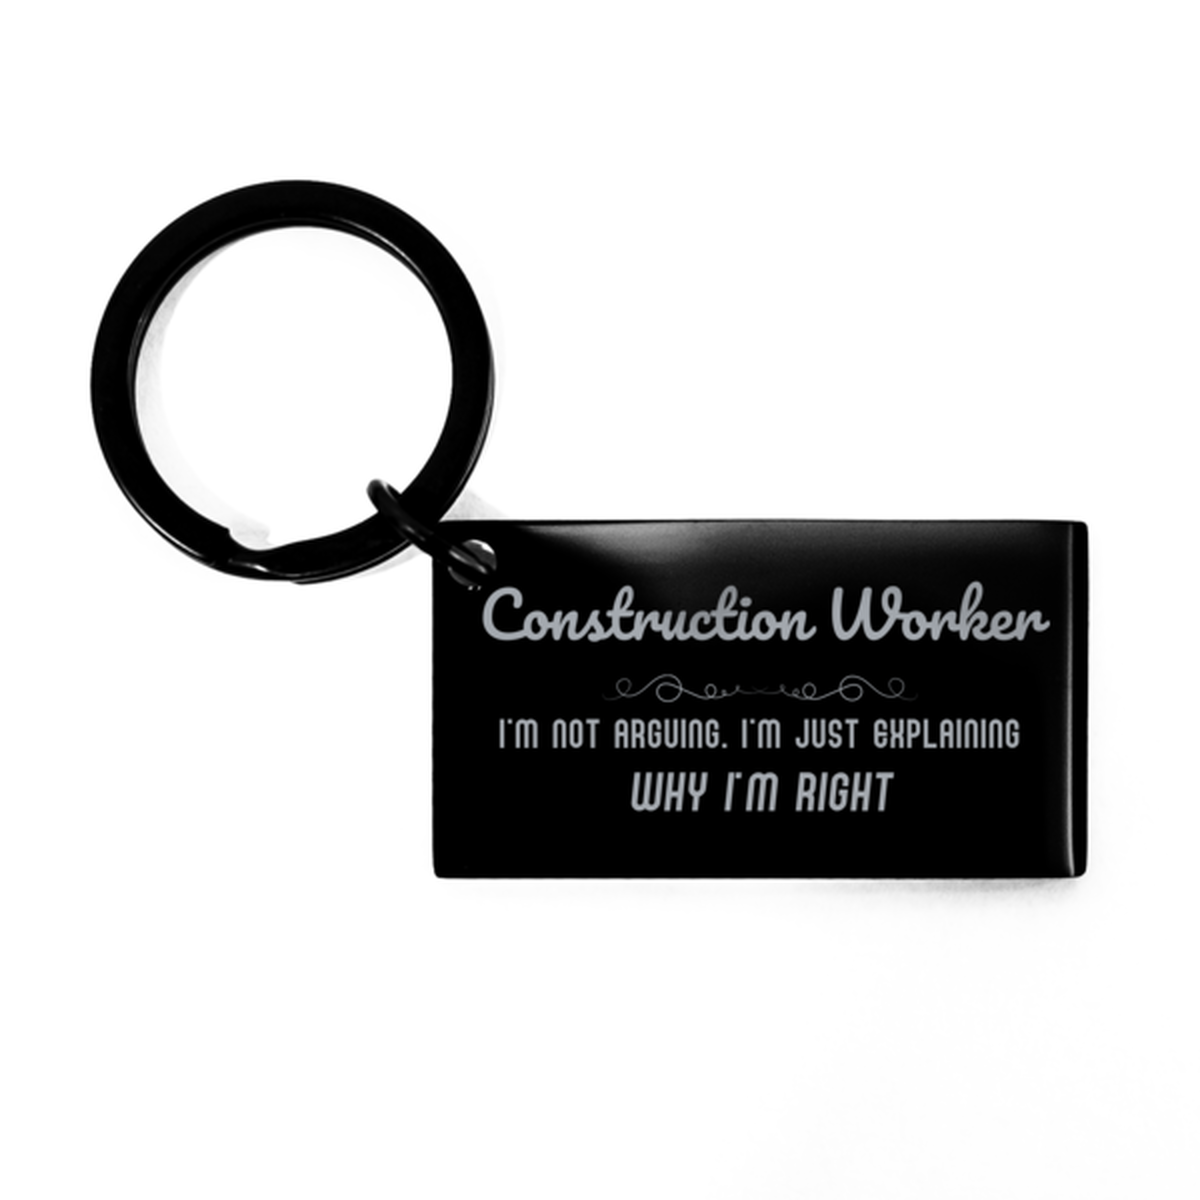 Construction Worker I'm not Arguing. I'm Just Explaining Why I'm RIGHT Keychain, Funny Saying Quote Construction Worker Gifts For Construction Worker Graduation Birthday Christmas Gifts for Men Women Coworker